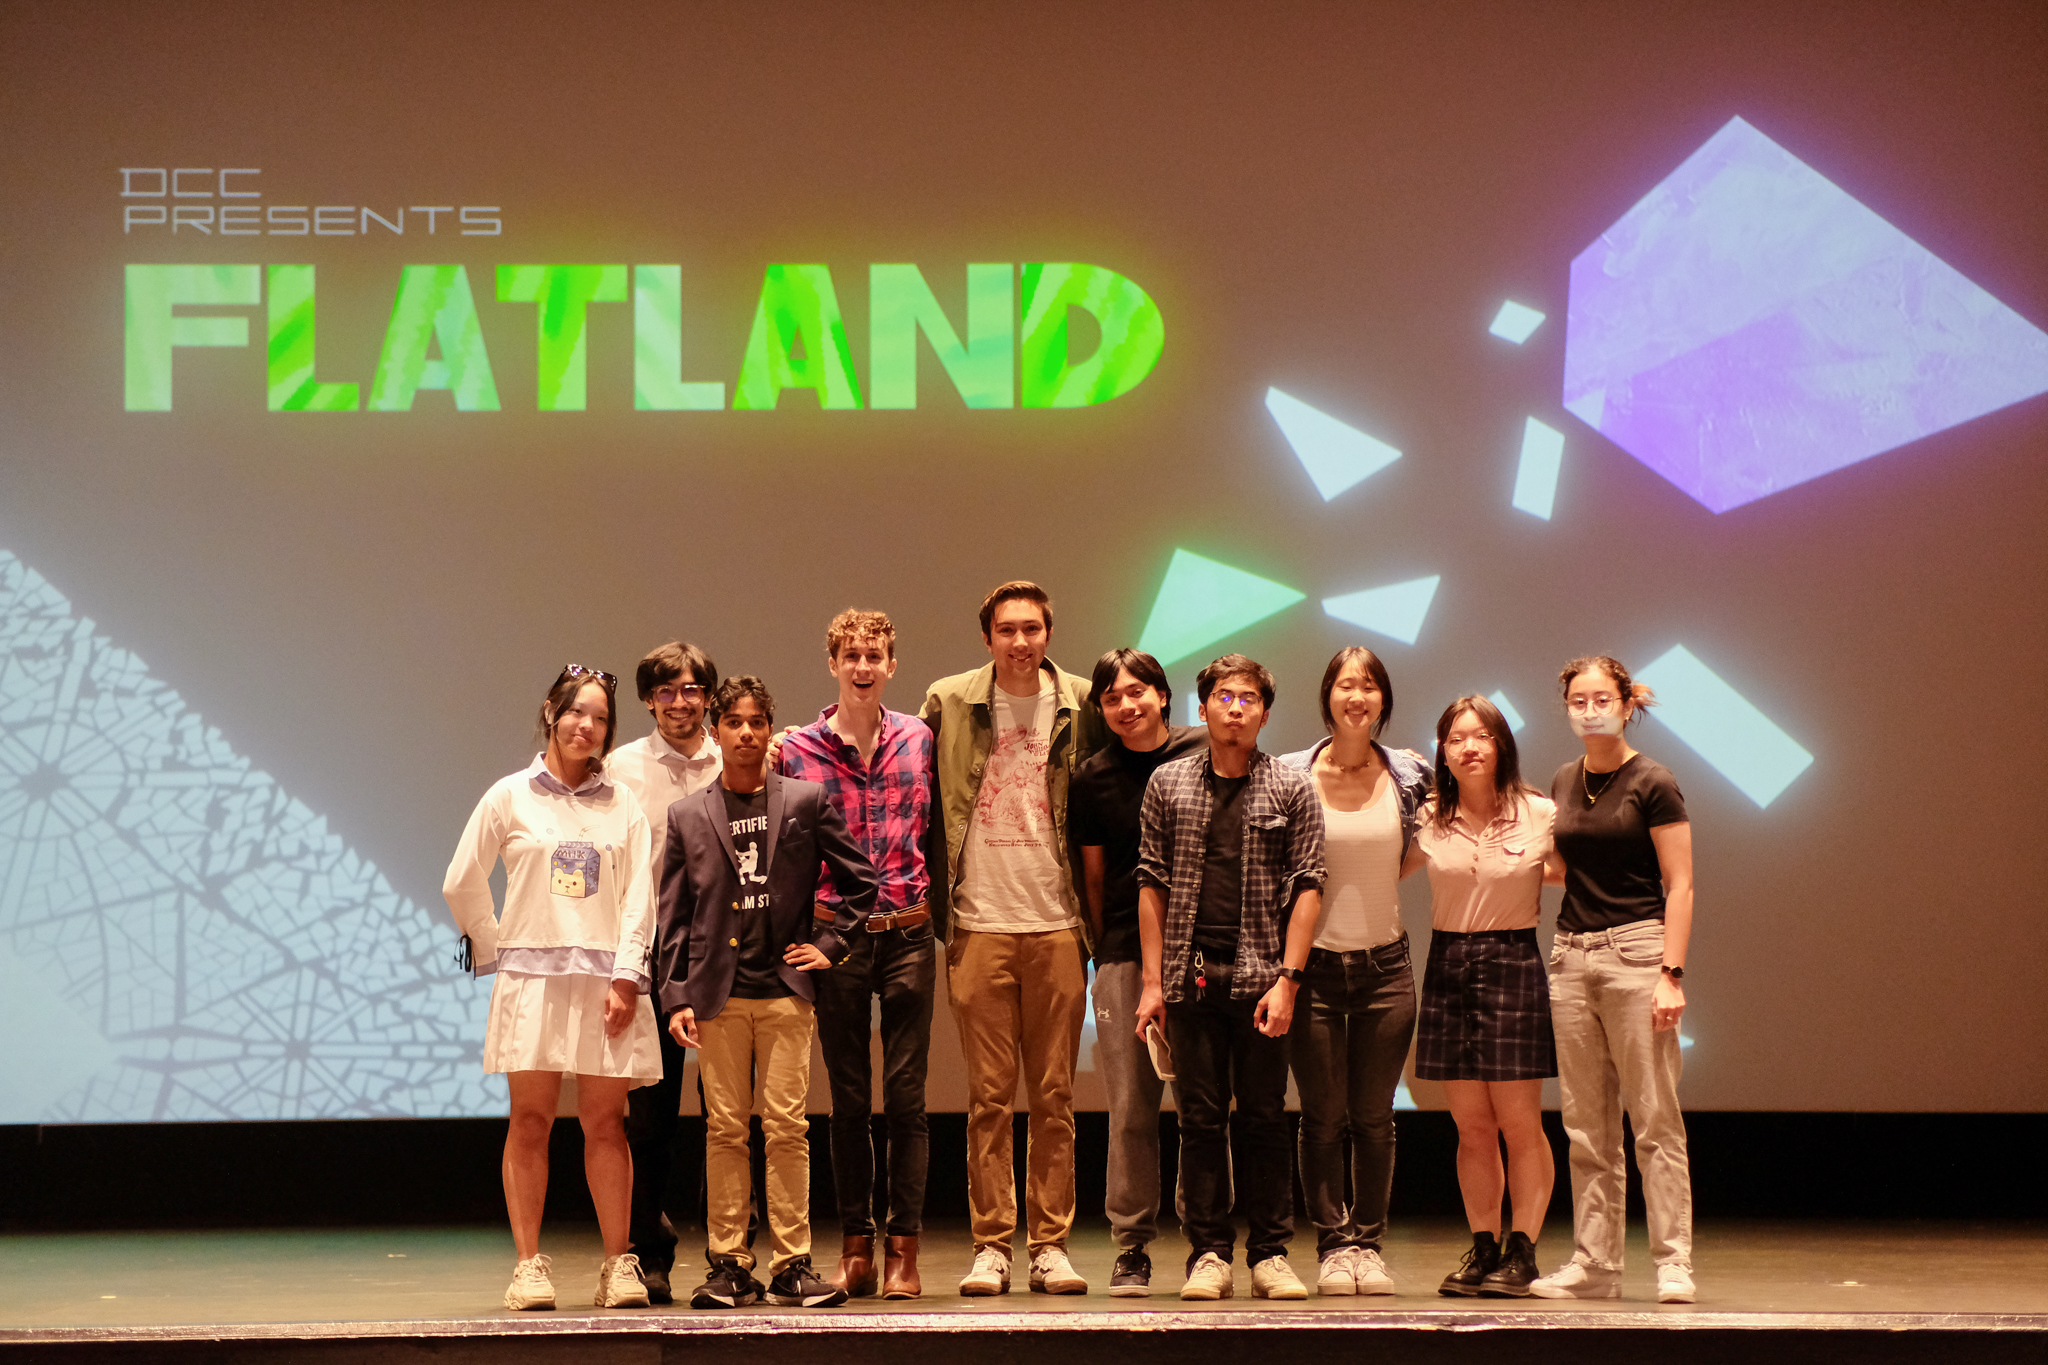 DCC breaks into new dimension with ‘Flatland,’ a collaborative film created by program’s first Creative-in-Residence